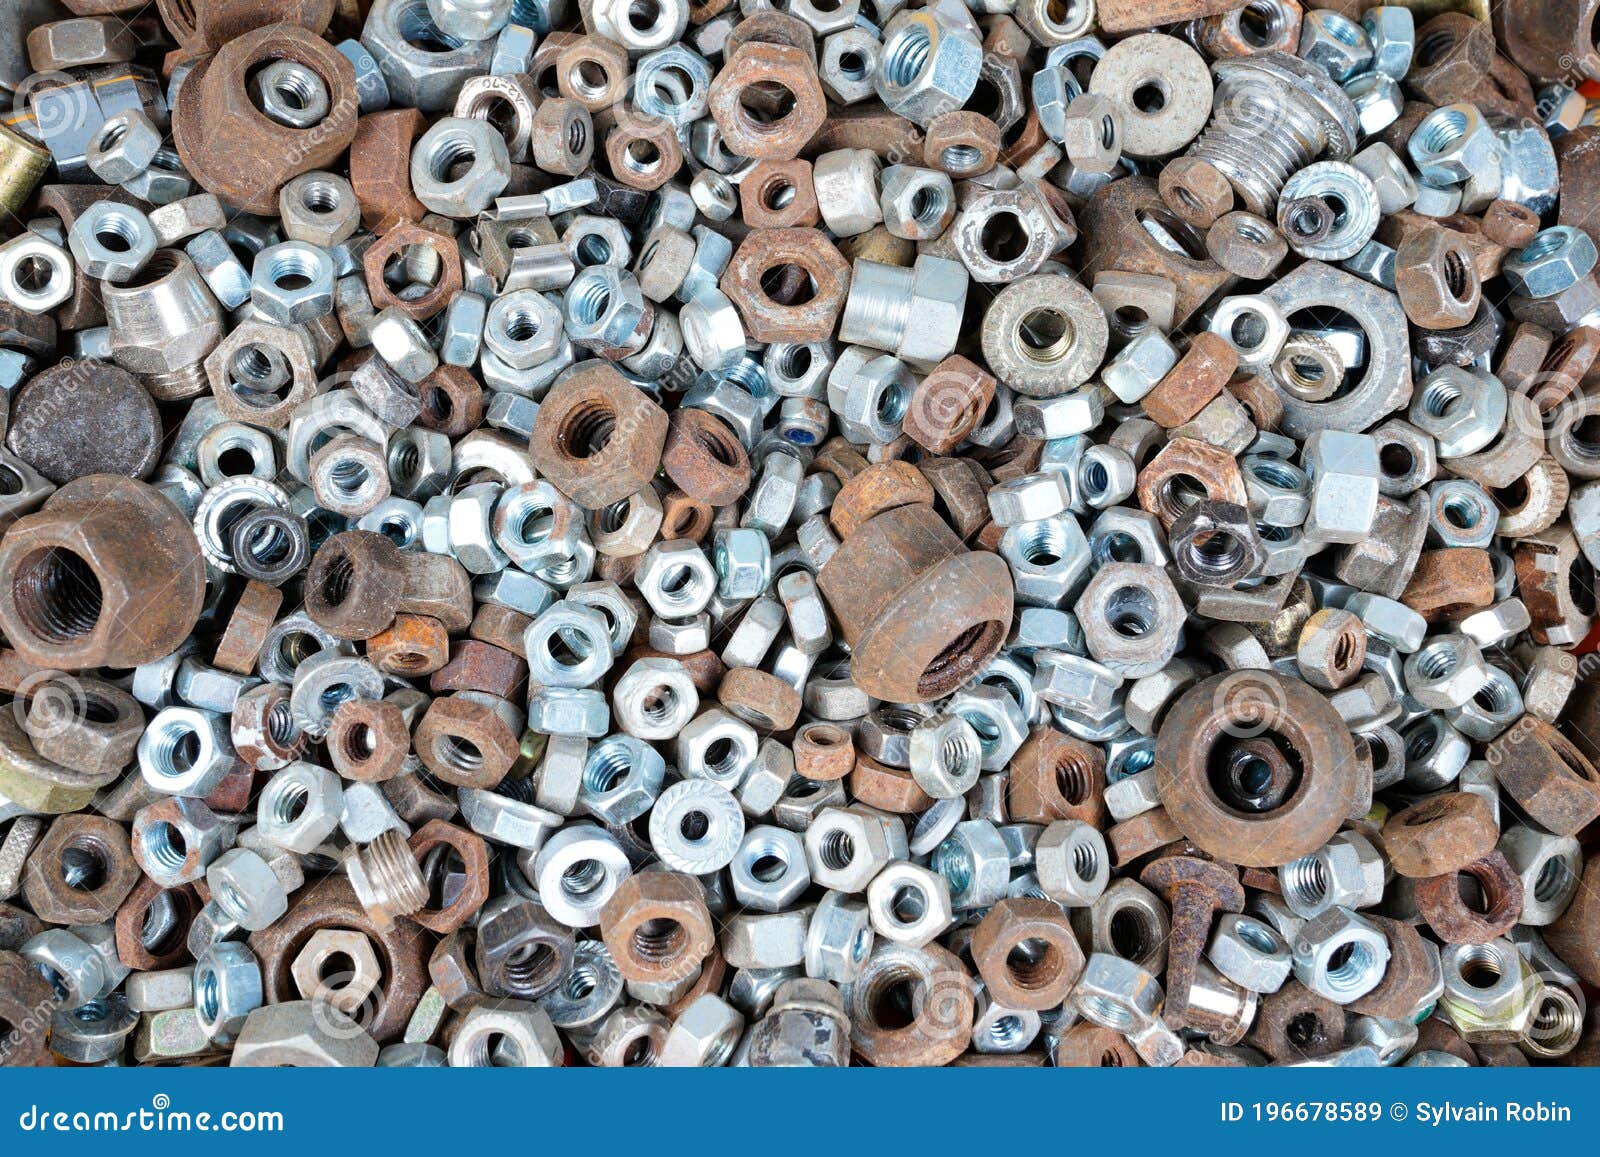 abstract industrial old background with rusty used nuts for wallpaper many metalware